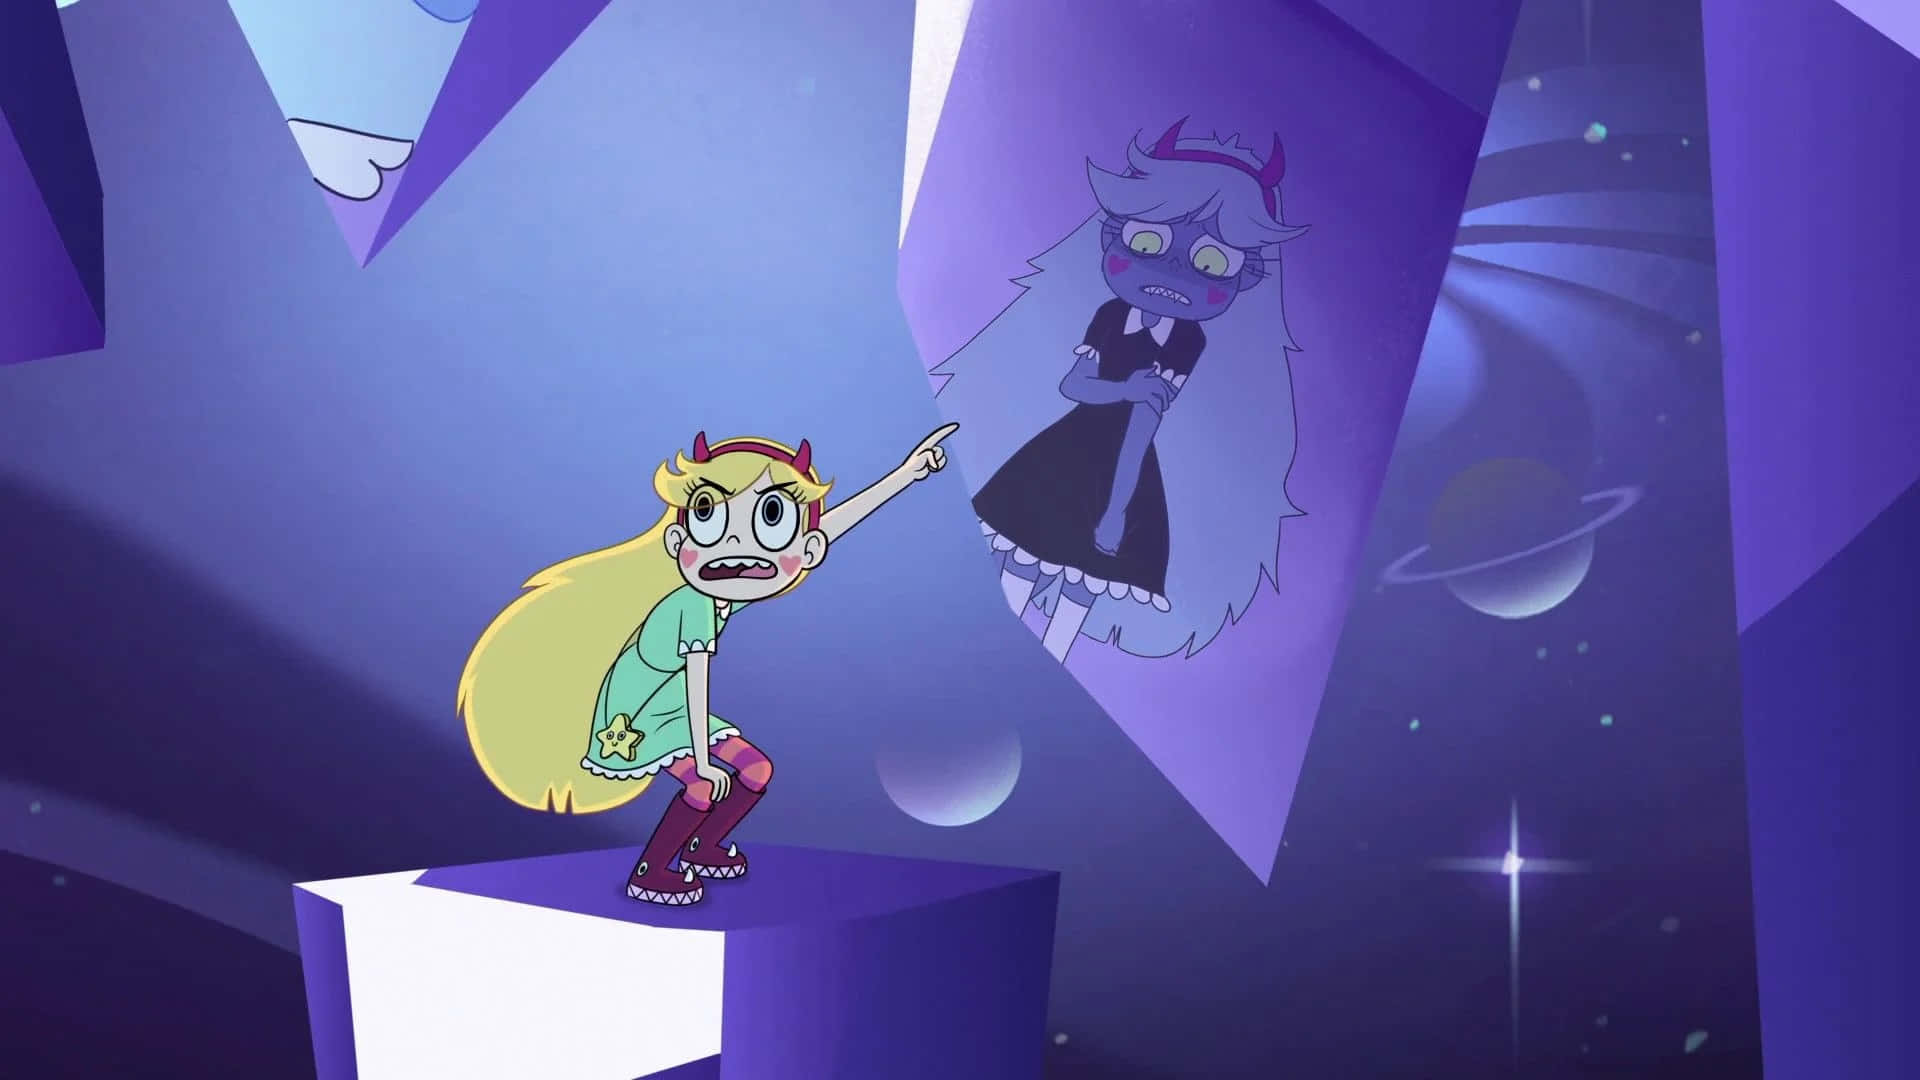 Starvs The Forces Of Evil 1920 X 1080 Baggrund.